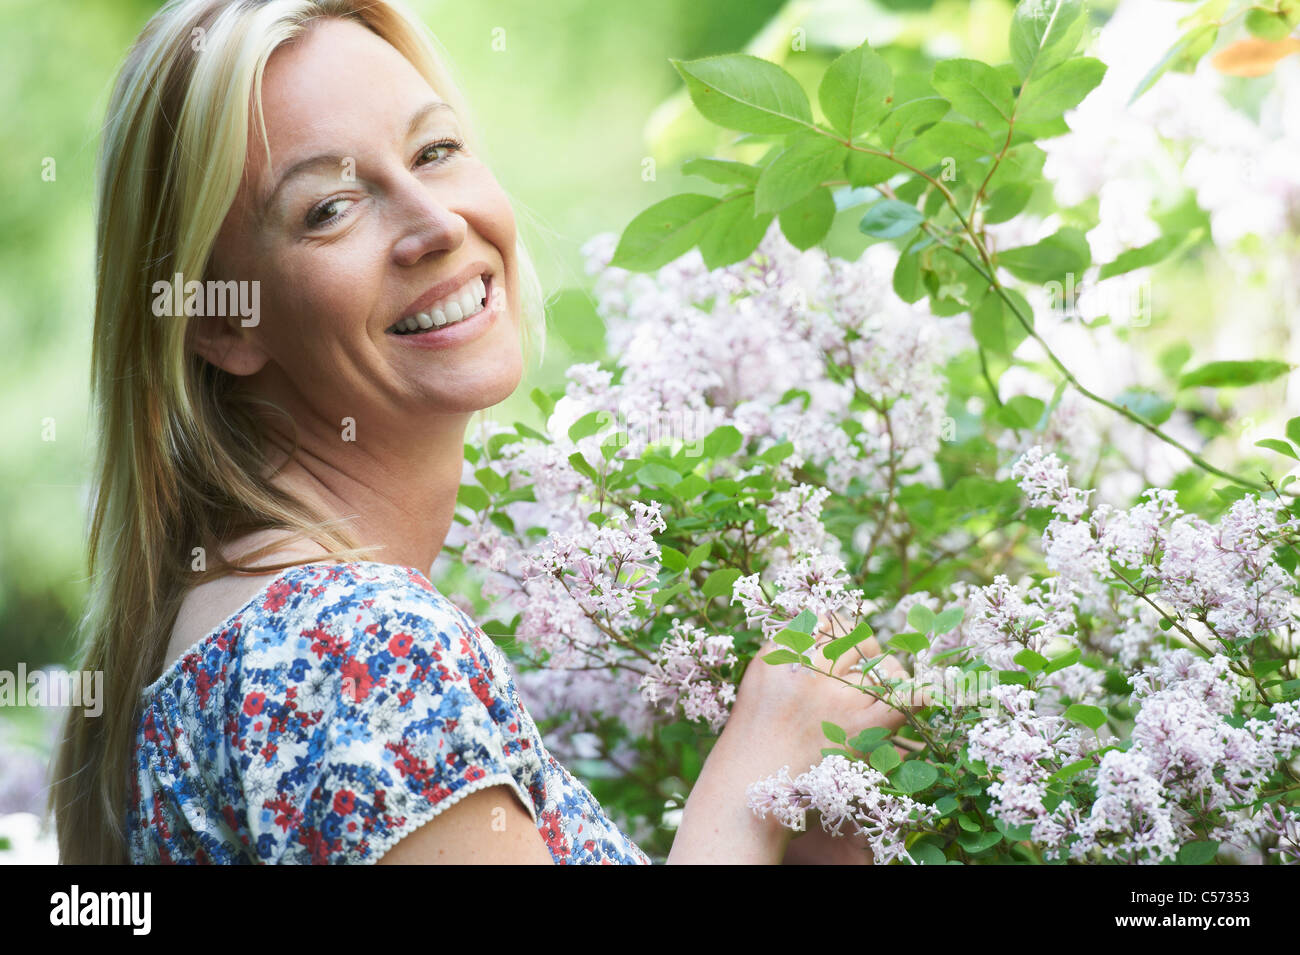 Smiling woman picking flowers Stock Photo